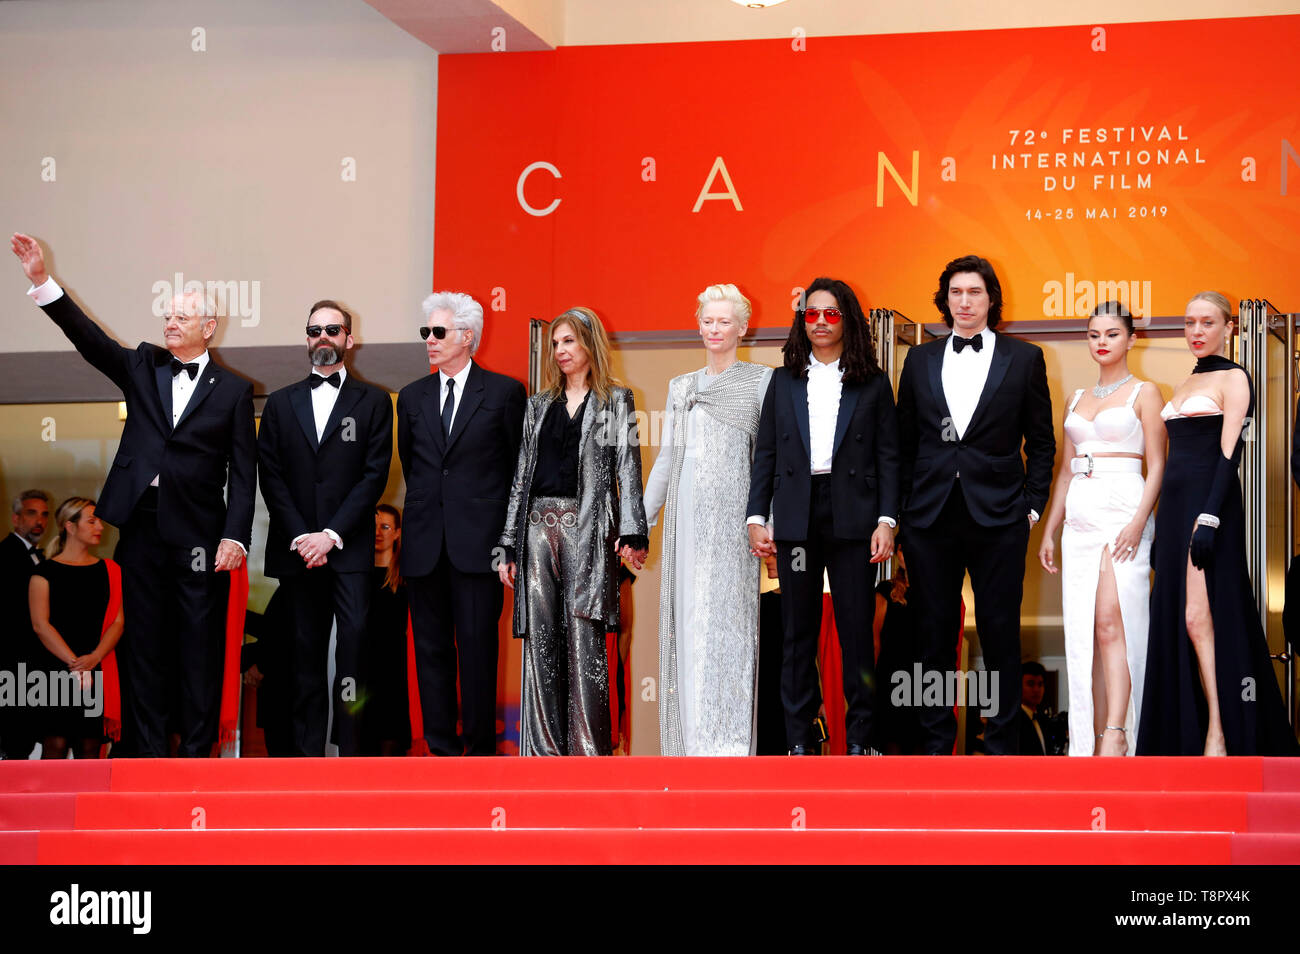 Cannes, France. 14th May, 2019. Thierry Fremaux, Bill Murray, Carter Logan, Jim Jarmusch, Sara Driver, Tilda Swinton, Luka Sabbat, Adam Driver, Selena Gomez and Chloe Sevigny attending the opening ceremony and screening of 'The Dead Don't Die' during the 72nd Cannes Film Festival at the Palais des Festivals on May 14, 2019 in Cannes, France Credit: Geisler-Fotopress GmbH/Alamy Live News Stock Photo